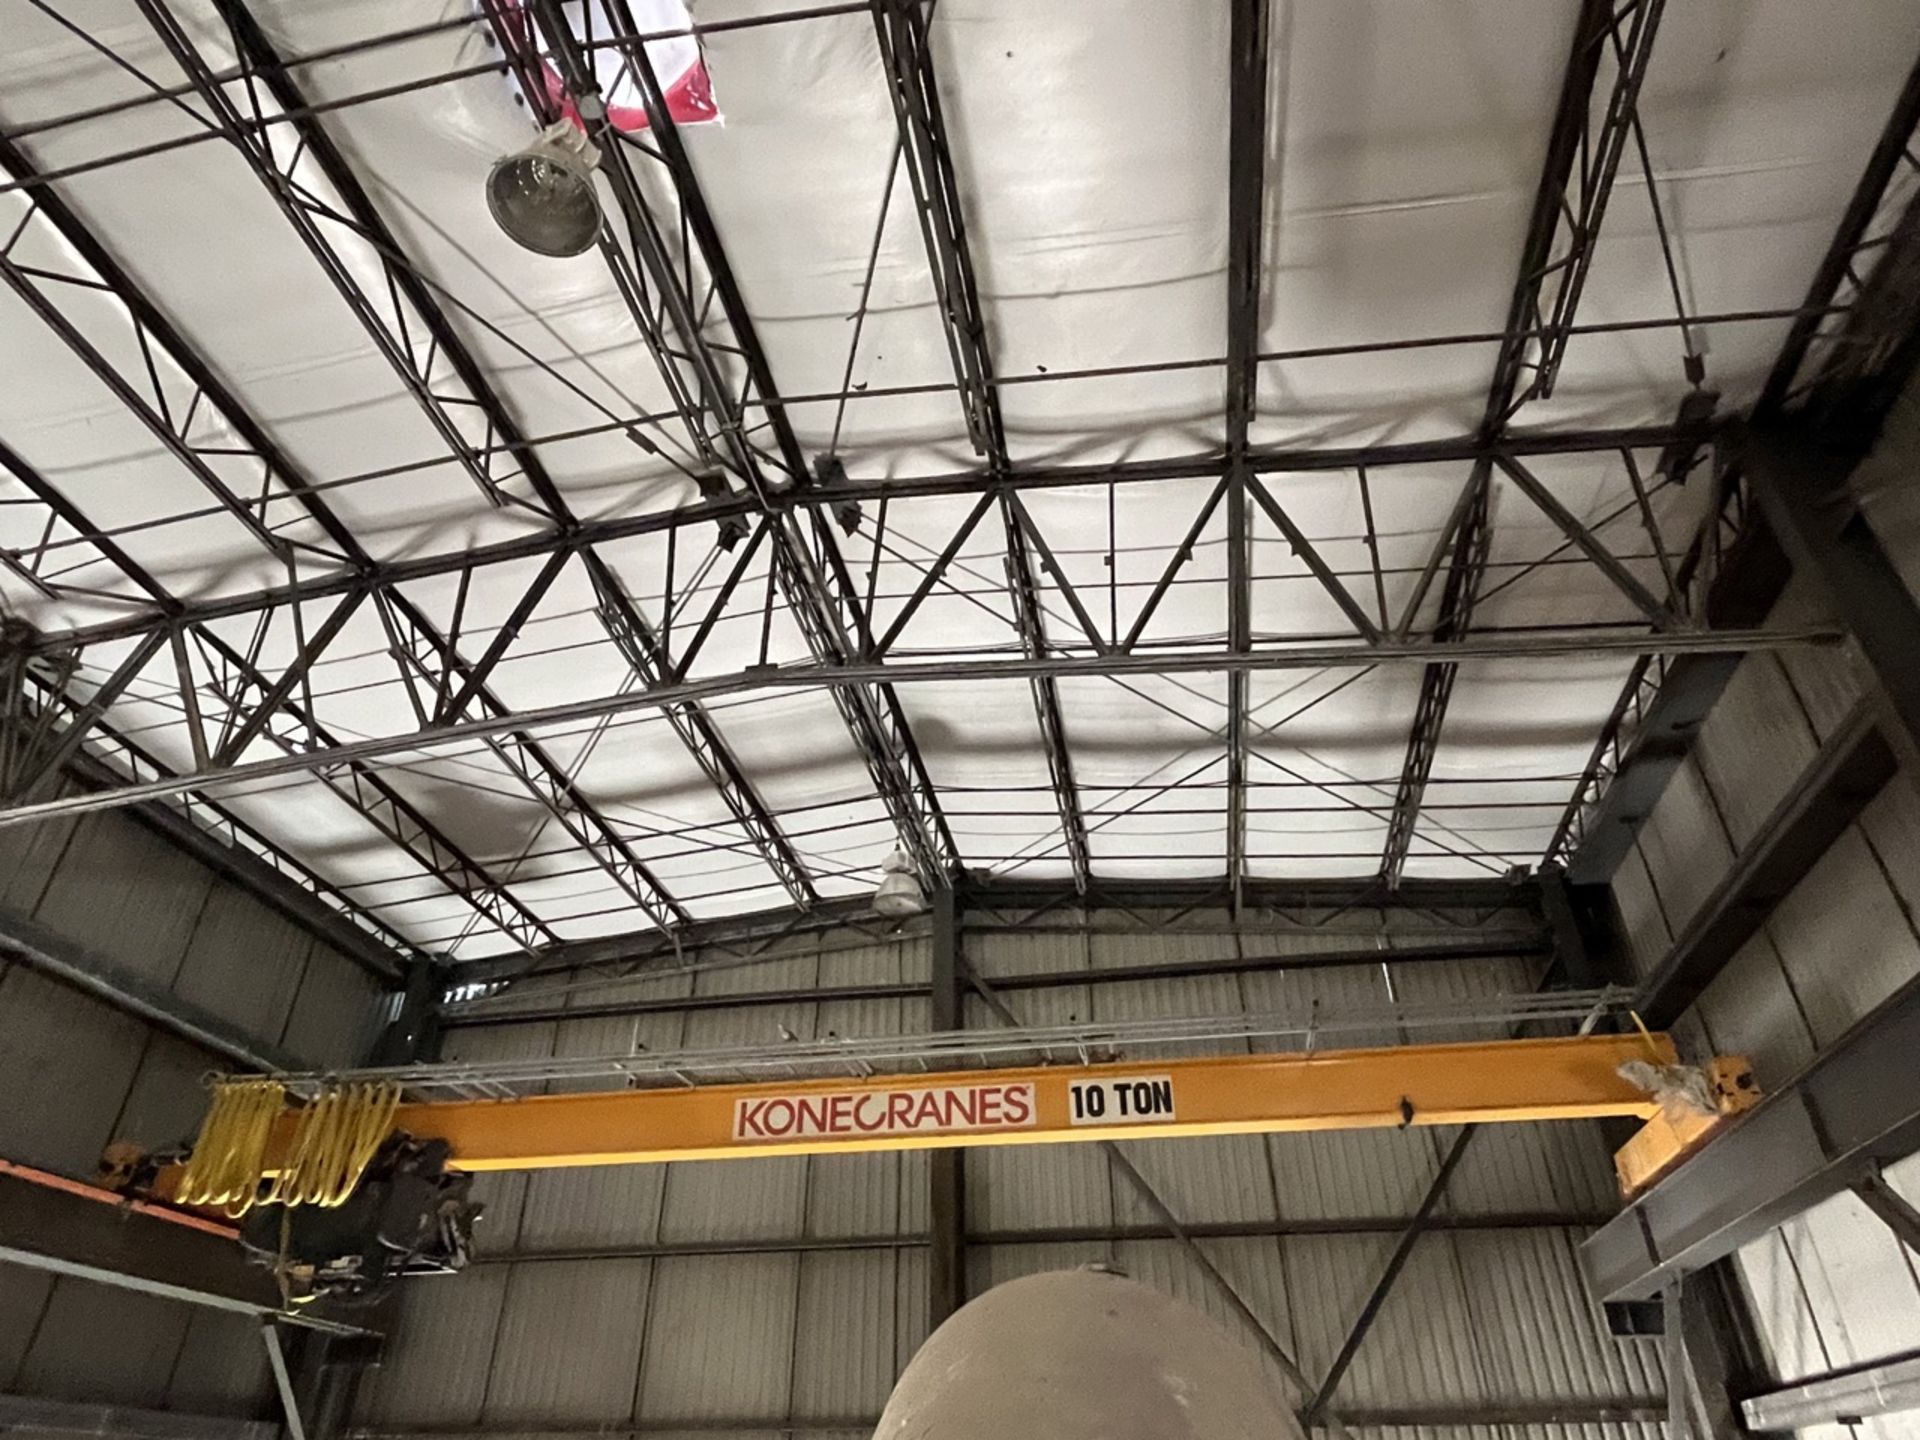 Konecranes overhead crane with a load capacity of 10 tons and a 15-meter lifting capacity; includes - Image 13 of 19